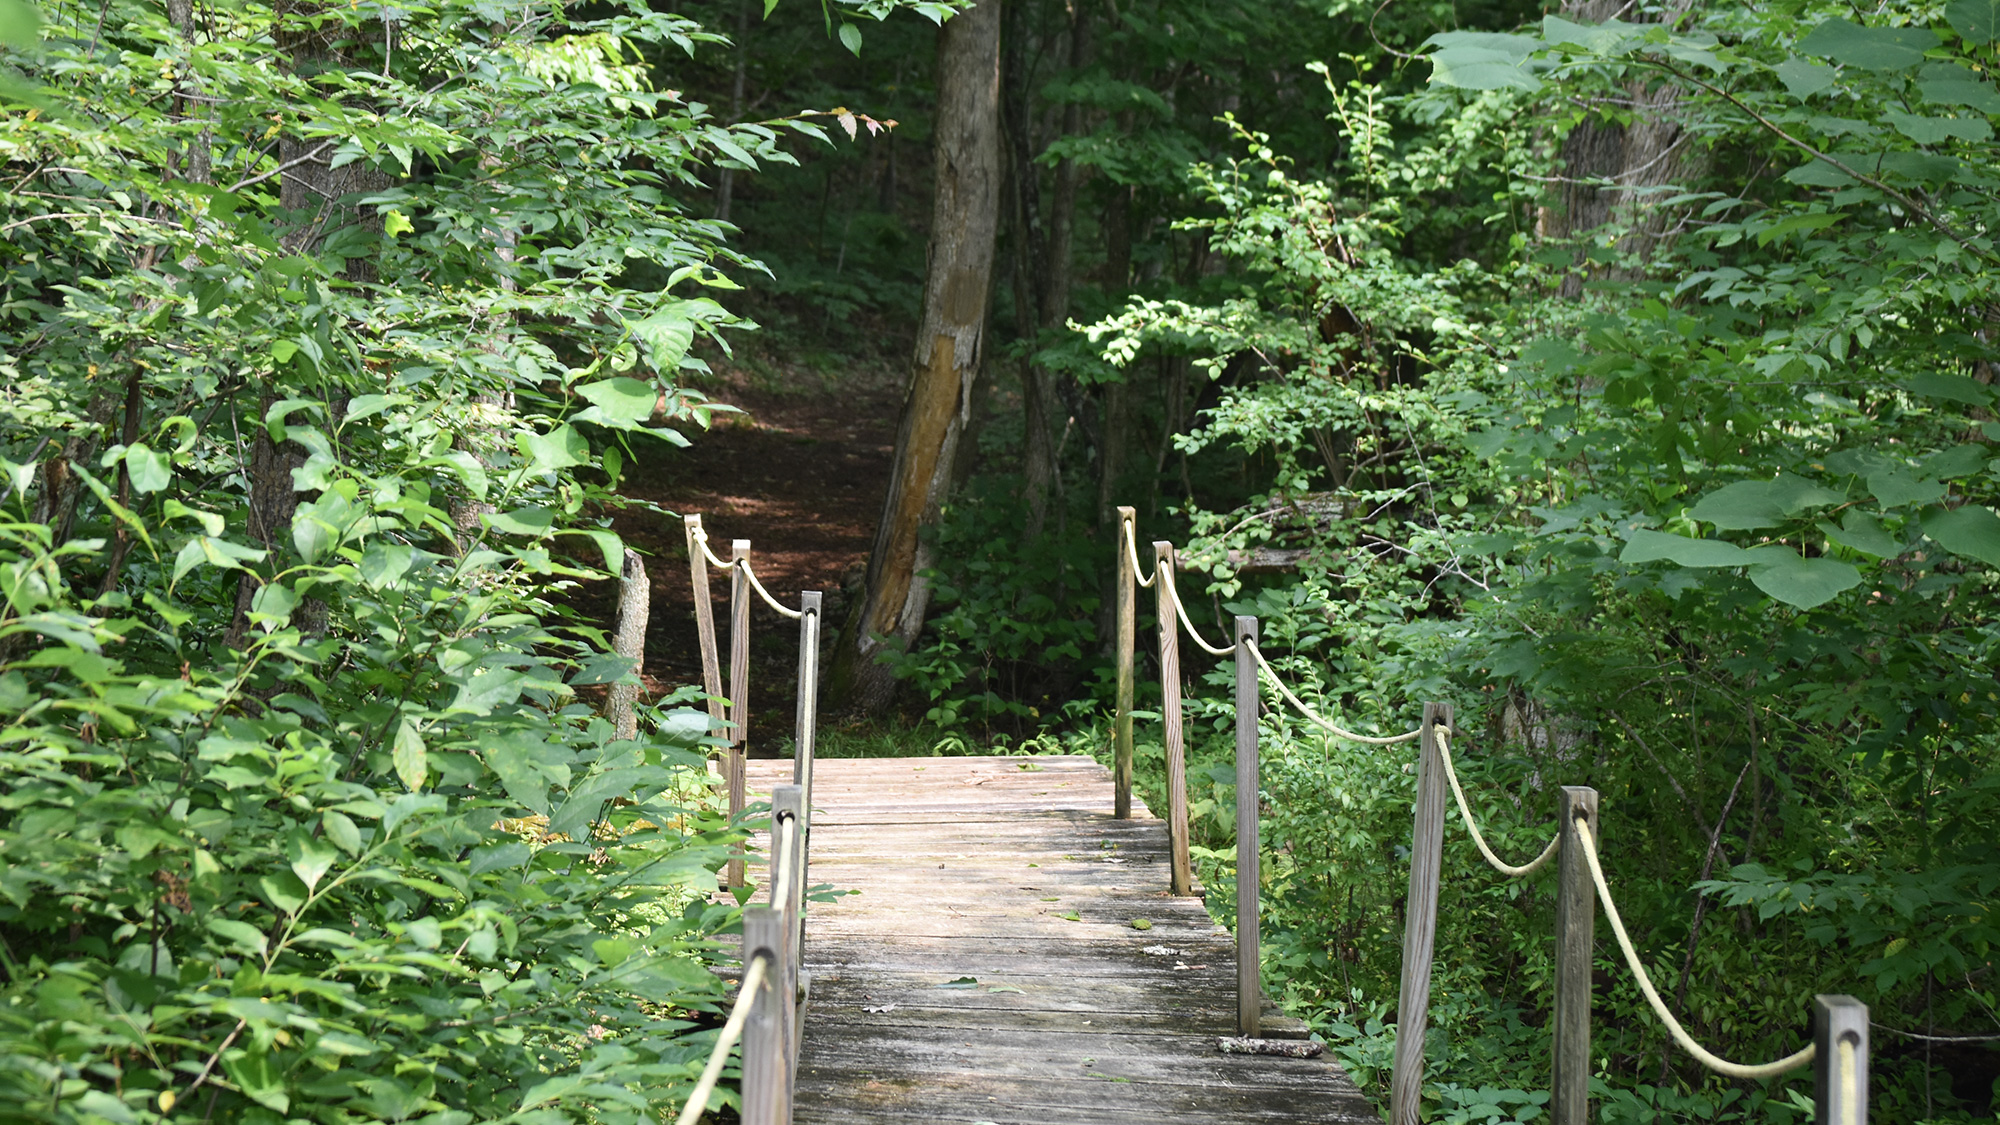 A footbridge leads into a wooded area